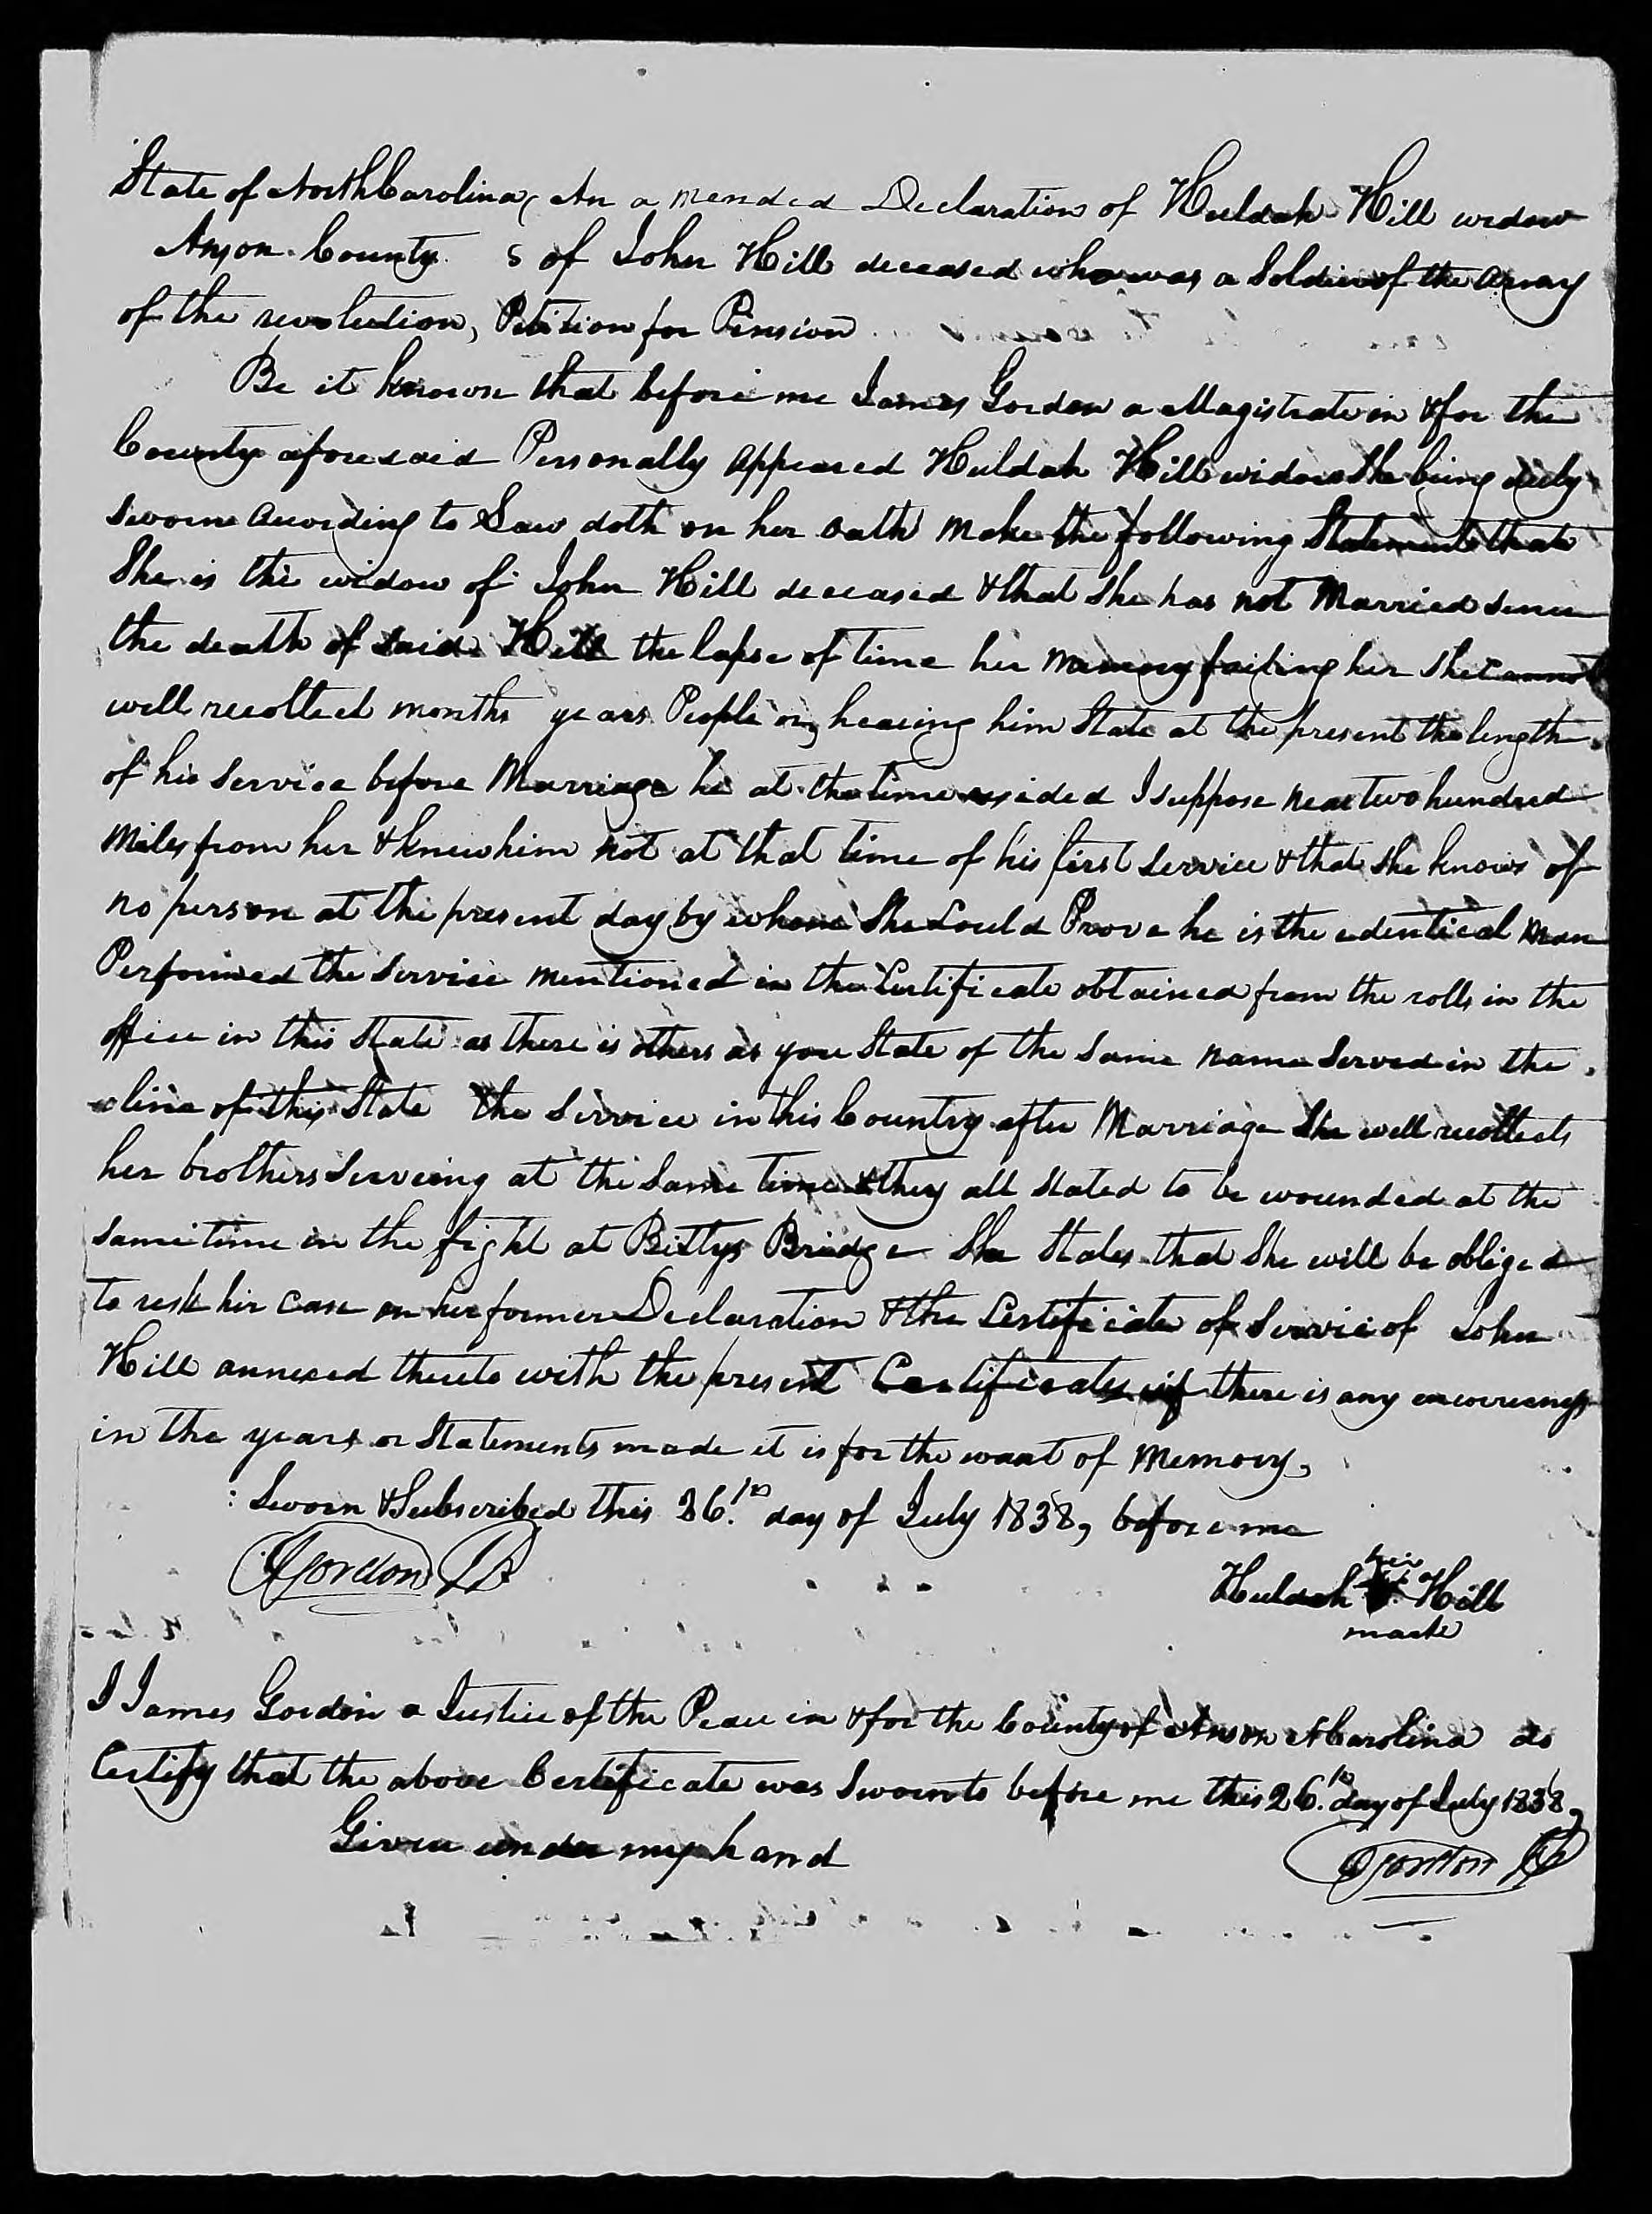 Application for a Widow's Pension from Huldah Hill, 26 July 1838